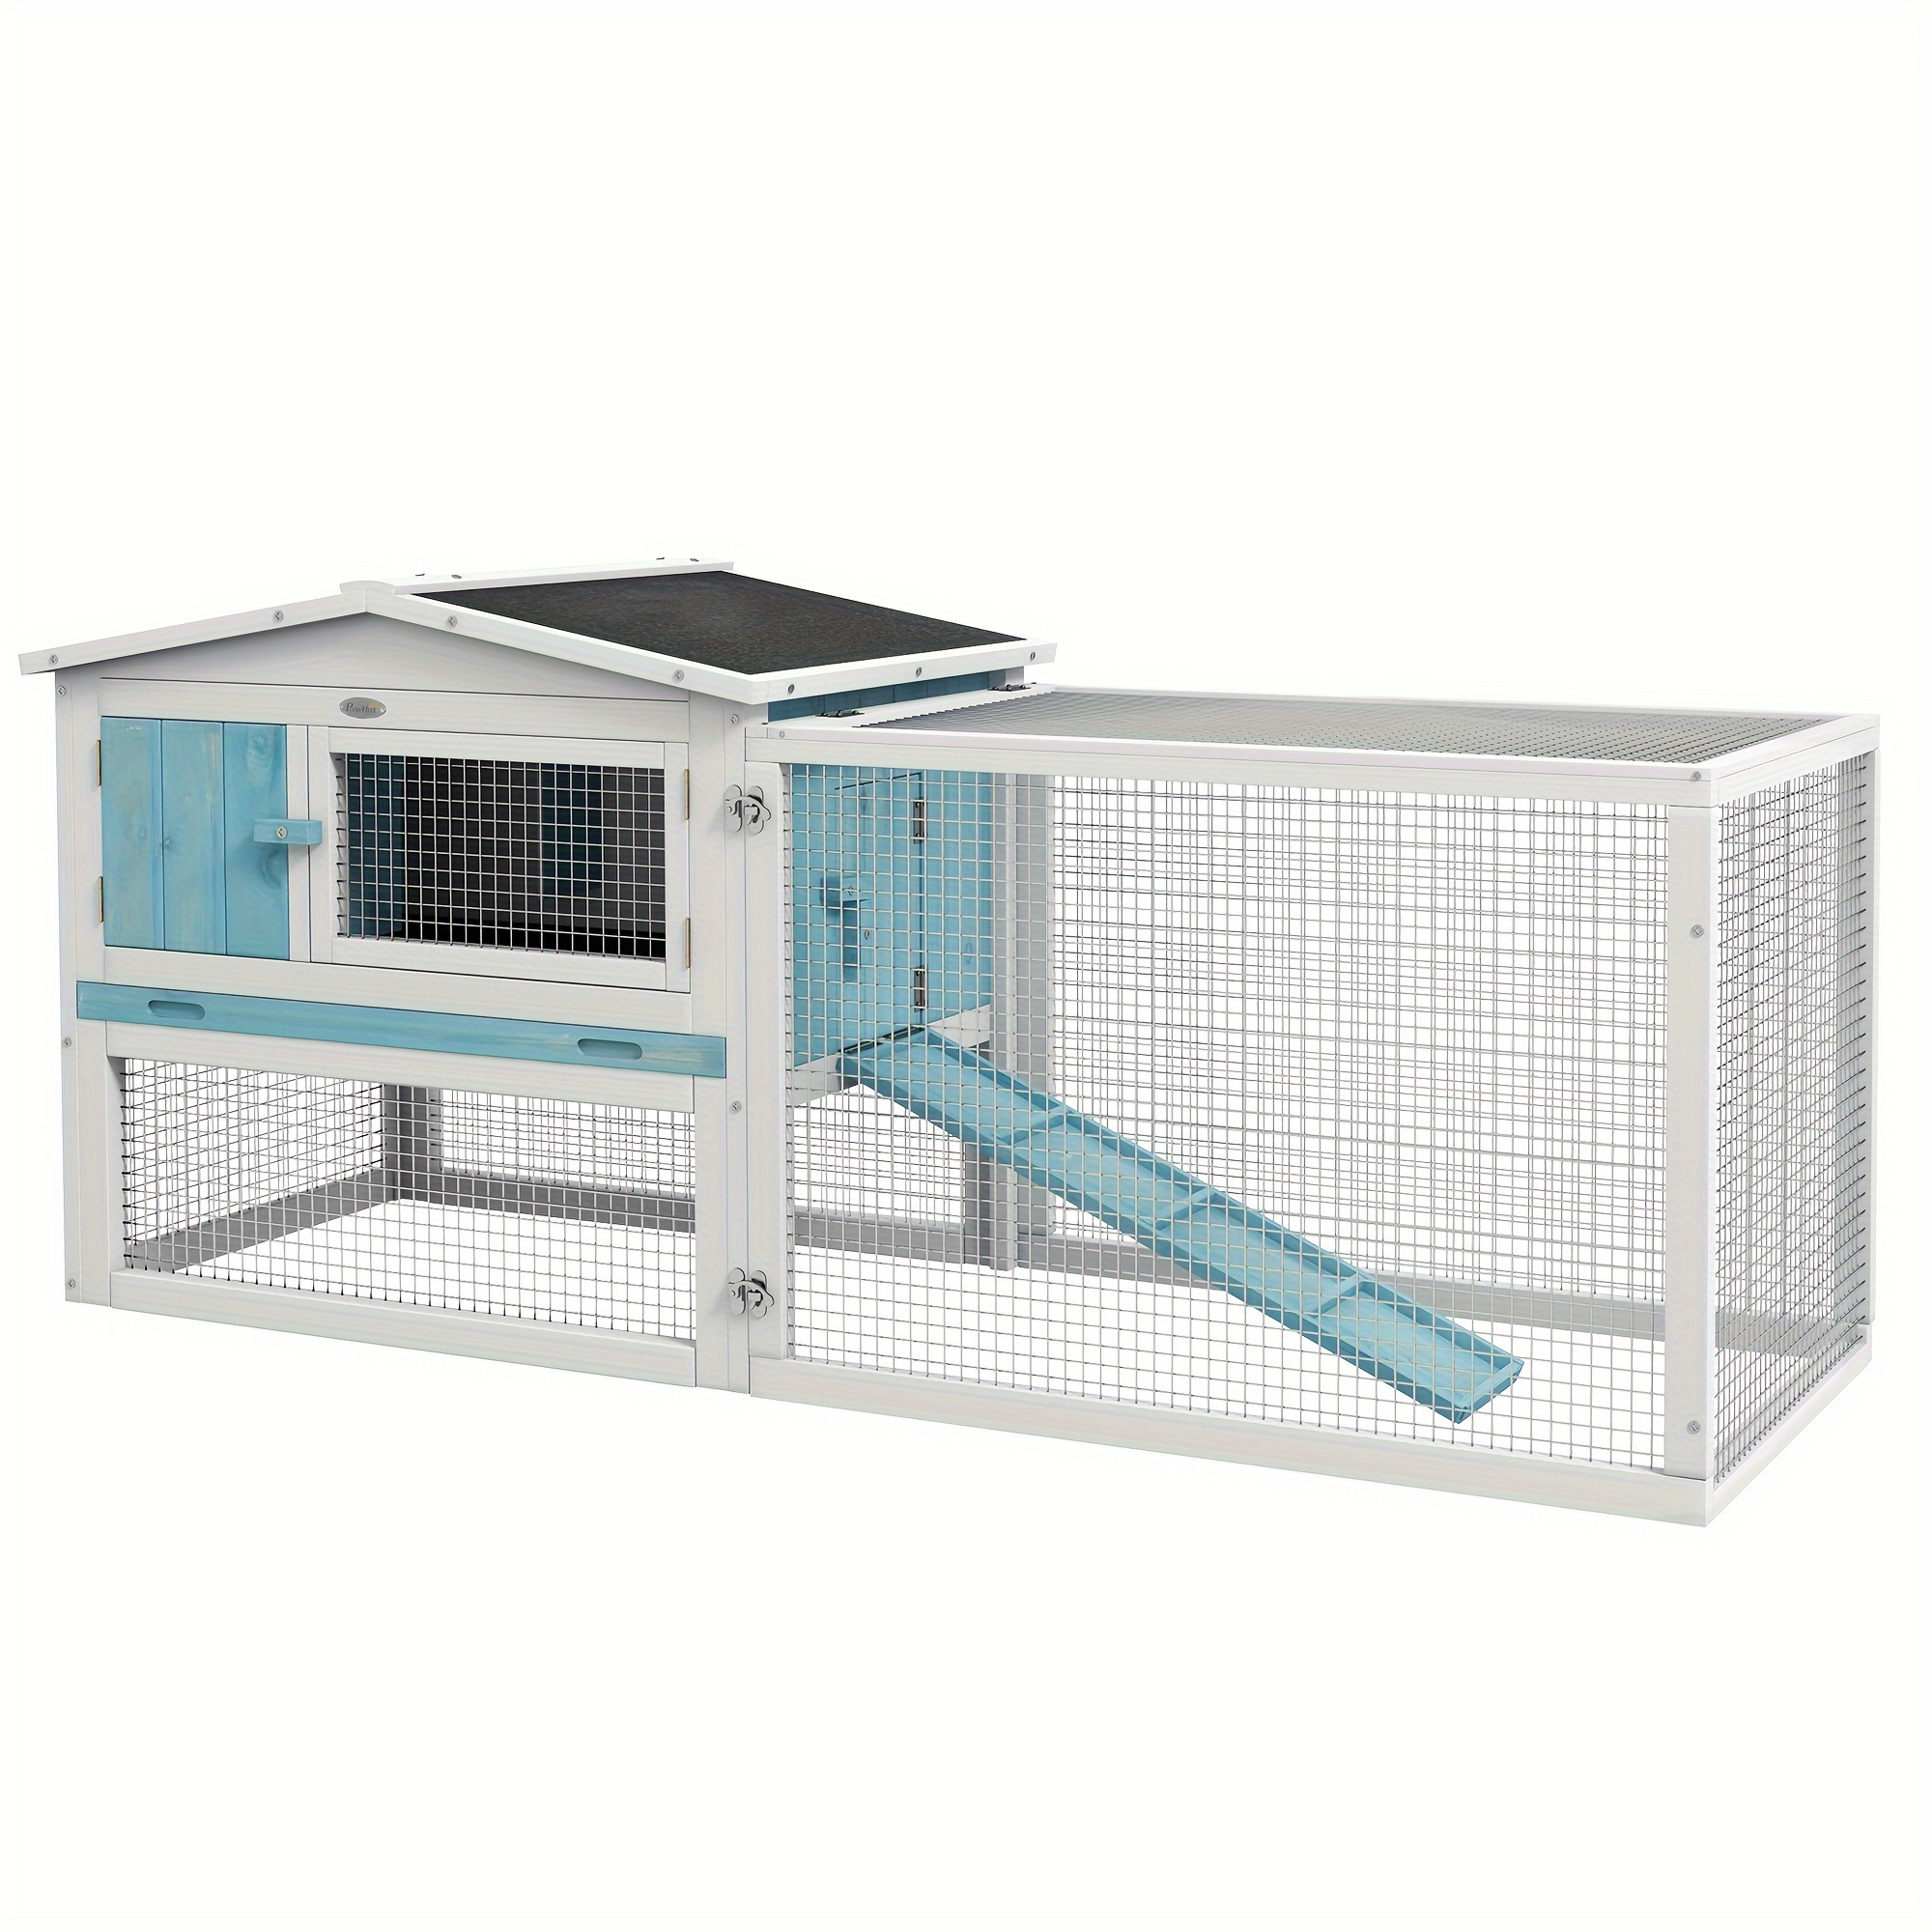 pawhut rabbit hutch 2 story bunny cage small animal house with slide out tray detachable run for indoor outdoor 61 5 x 23 x 27 light blue